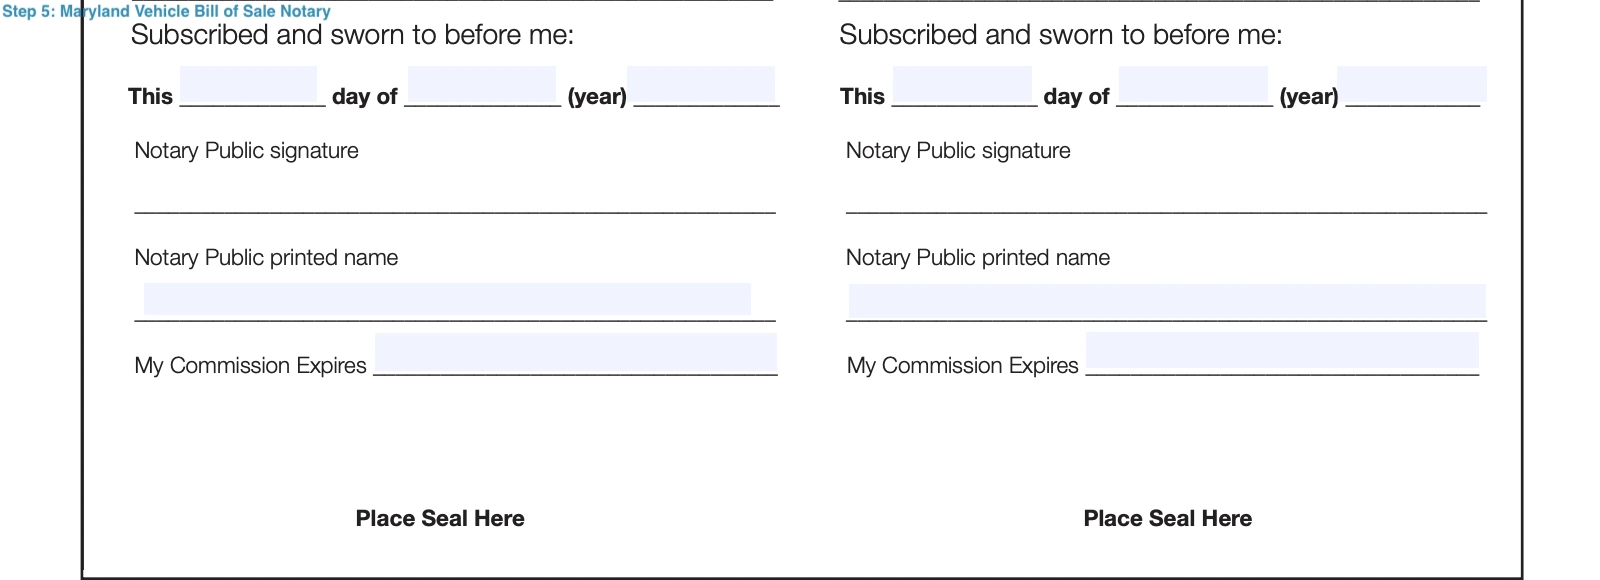 step 5 to filling out a maryland vehicle bill of sale template notary